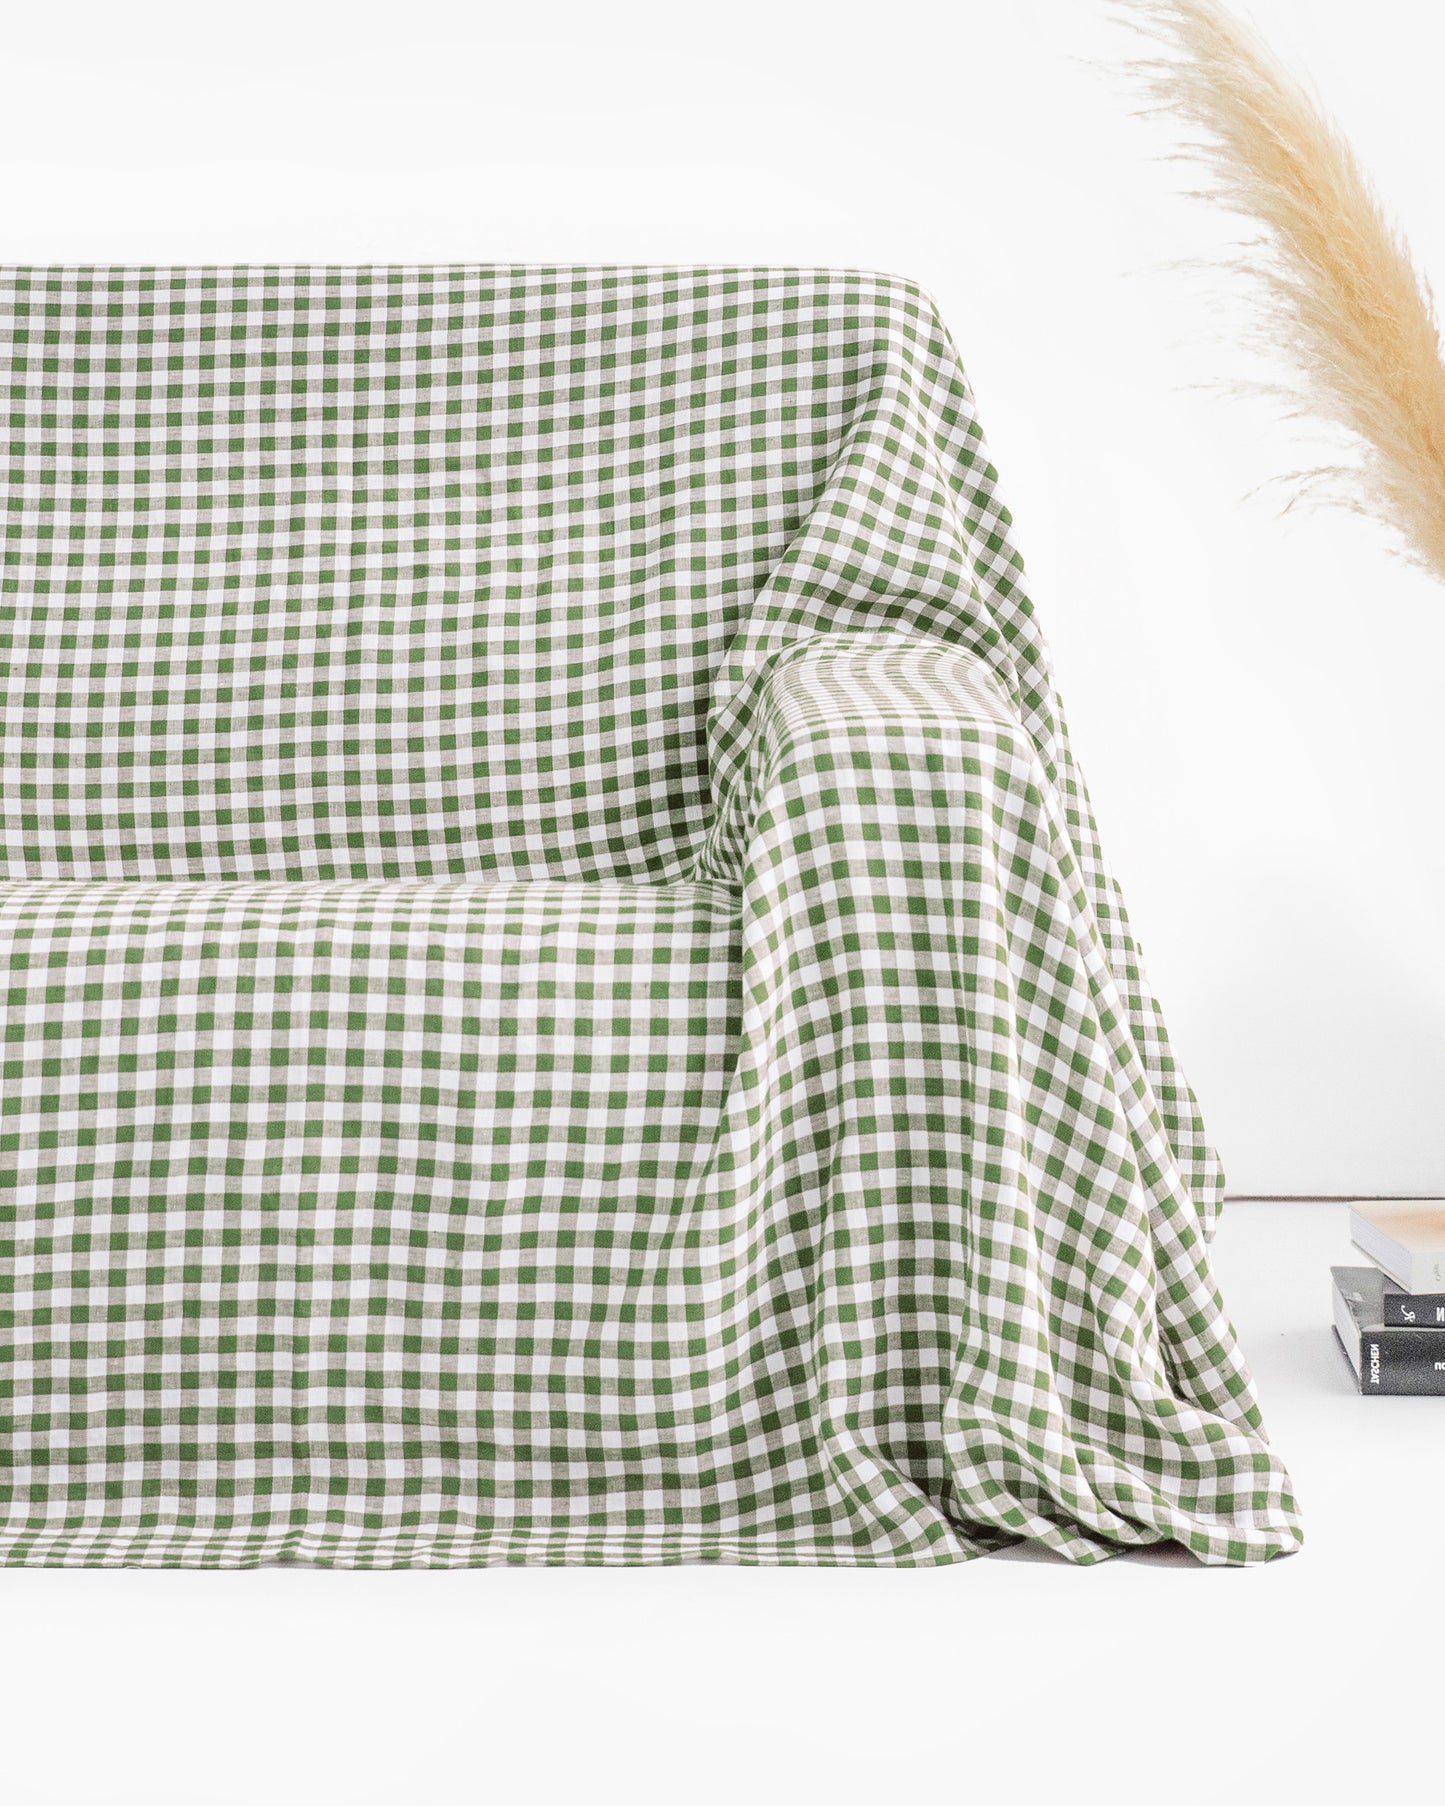 Linen couch cover in Forest green gingham - MagicLinen